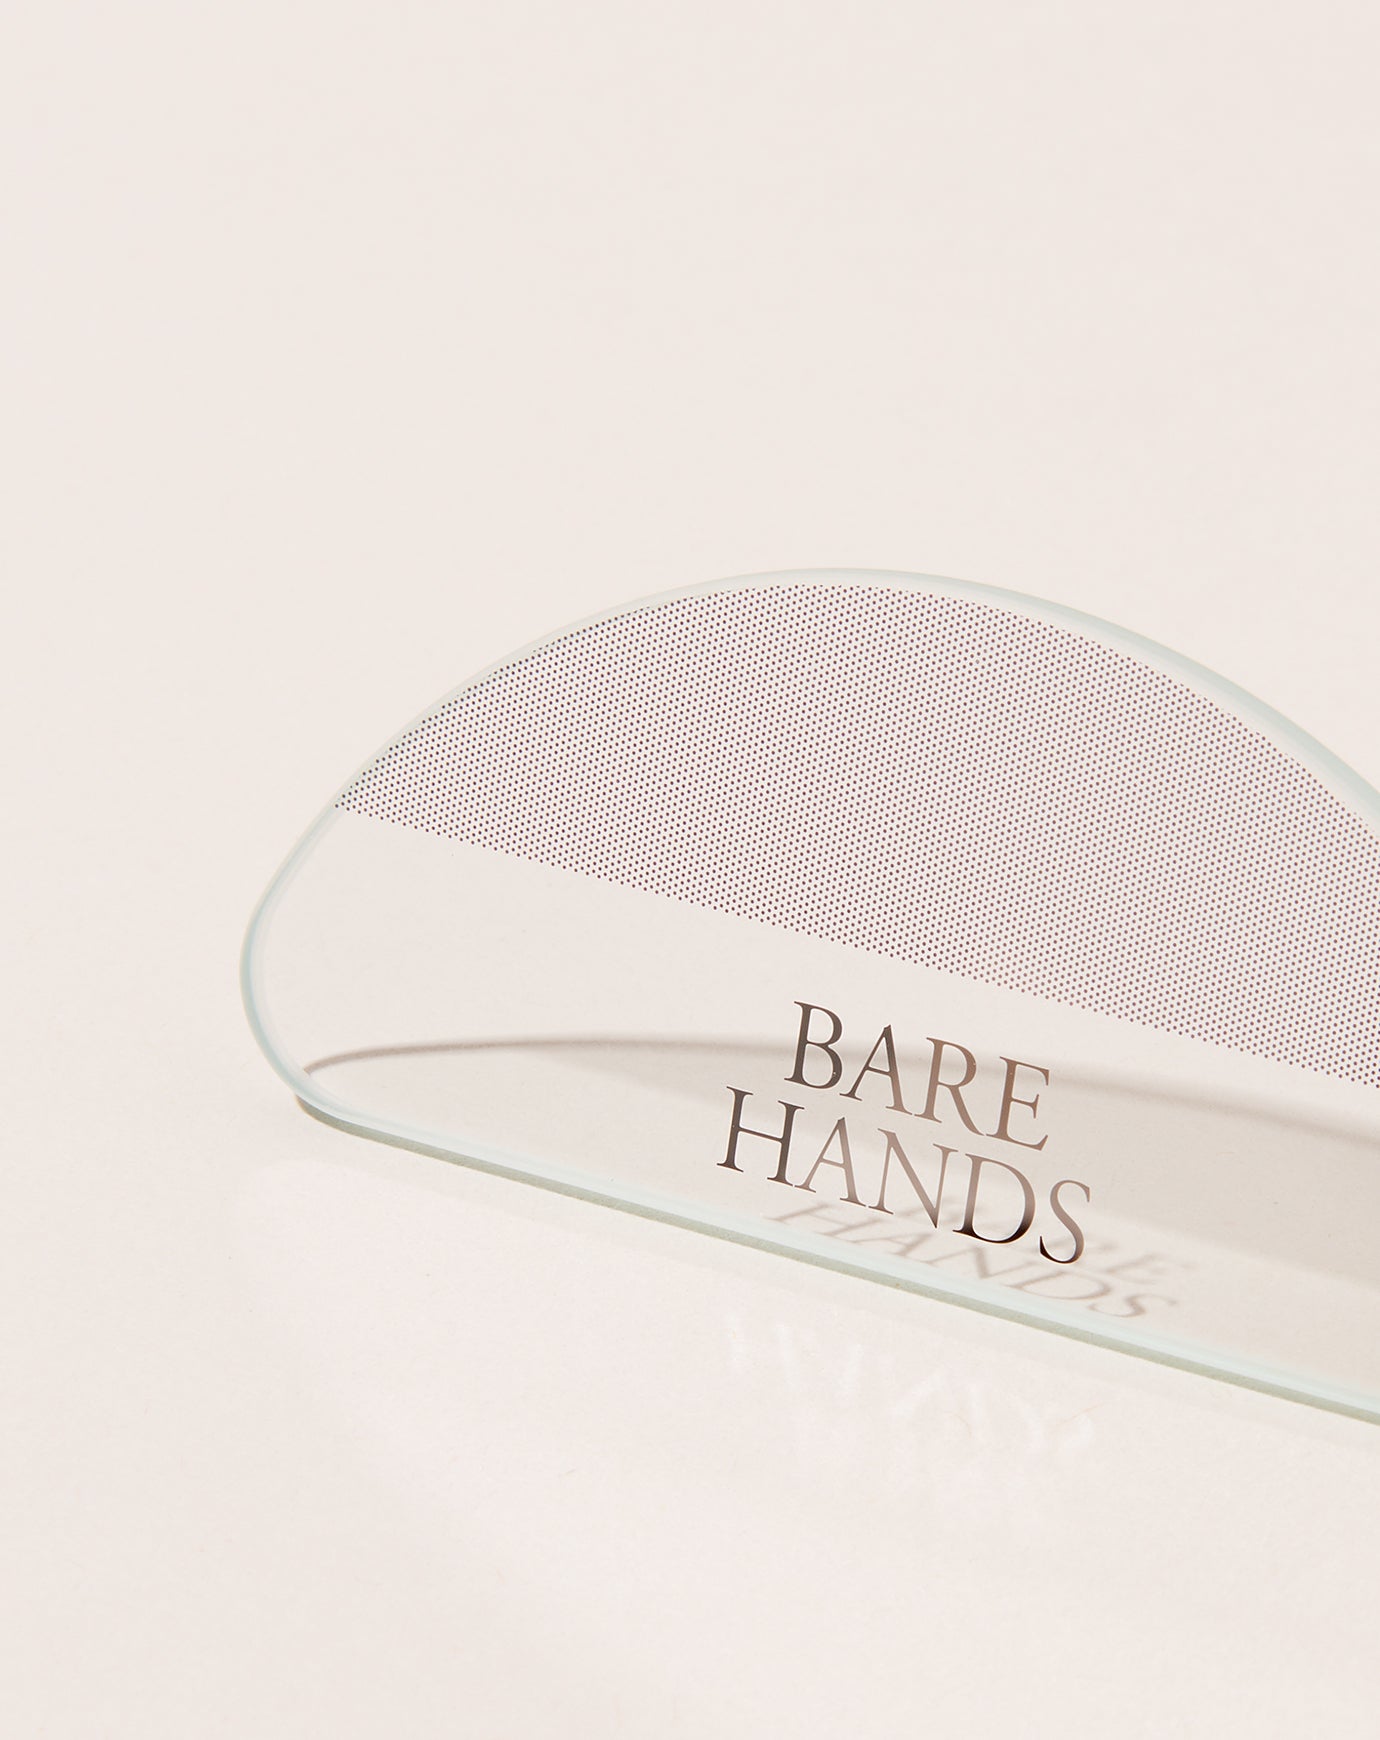 Bare Hands The Dry Gloss Manicure Kit in Citrine